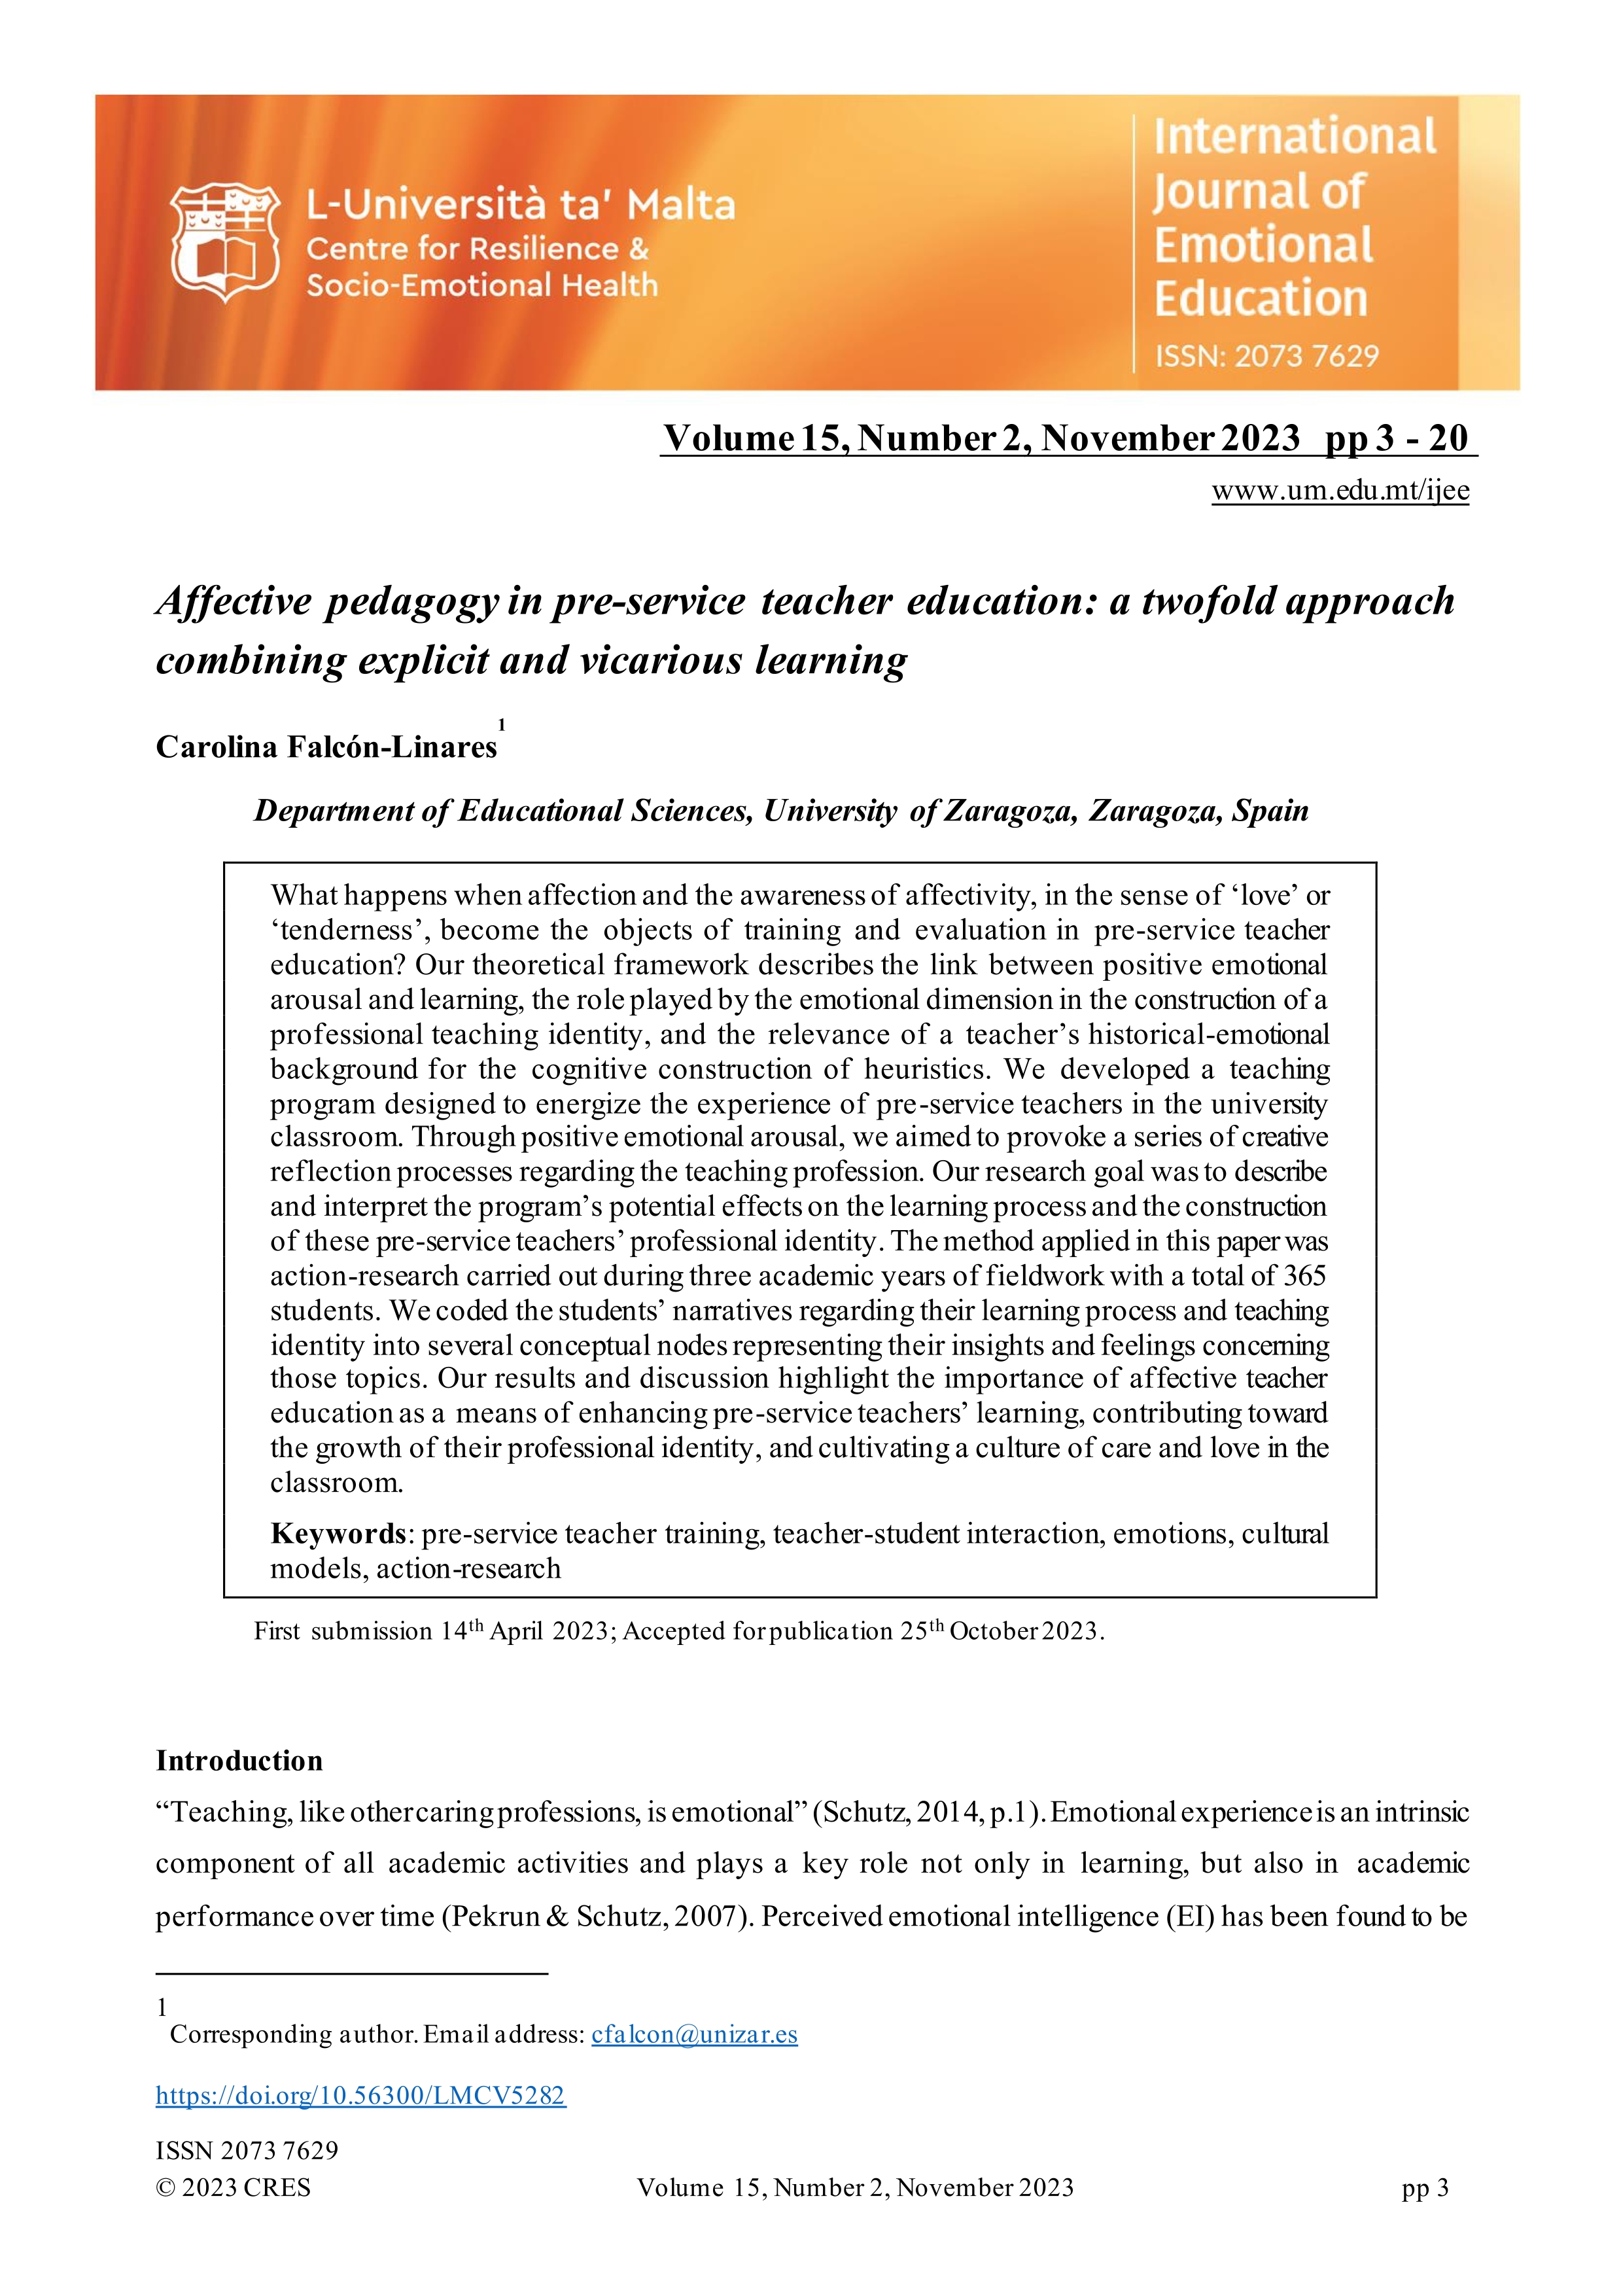 Affective pedagogy in pre-service teacher education: a twofold approach combining explicit and vicarious learning